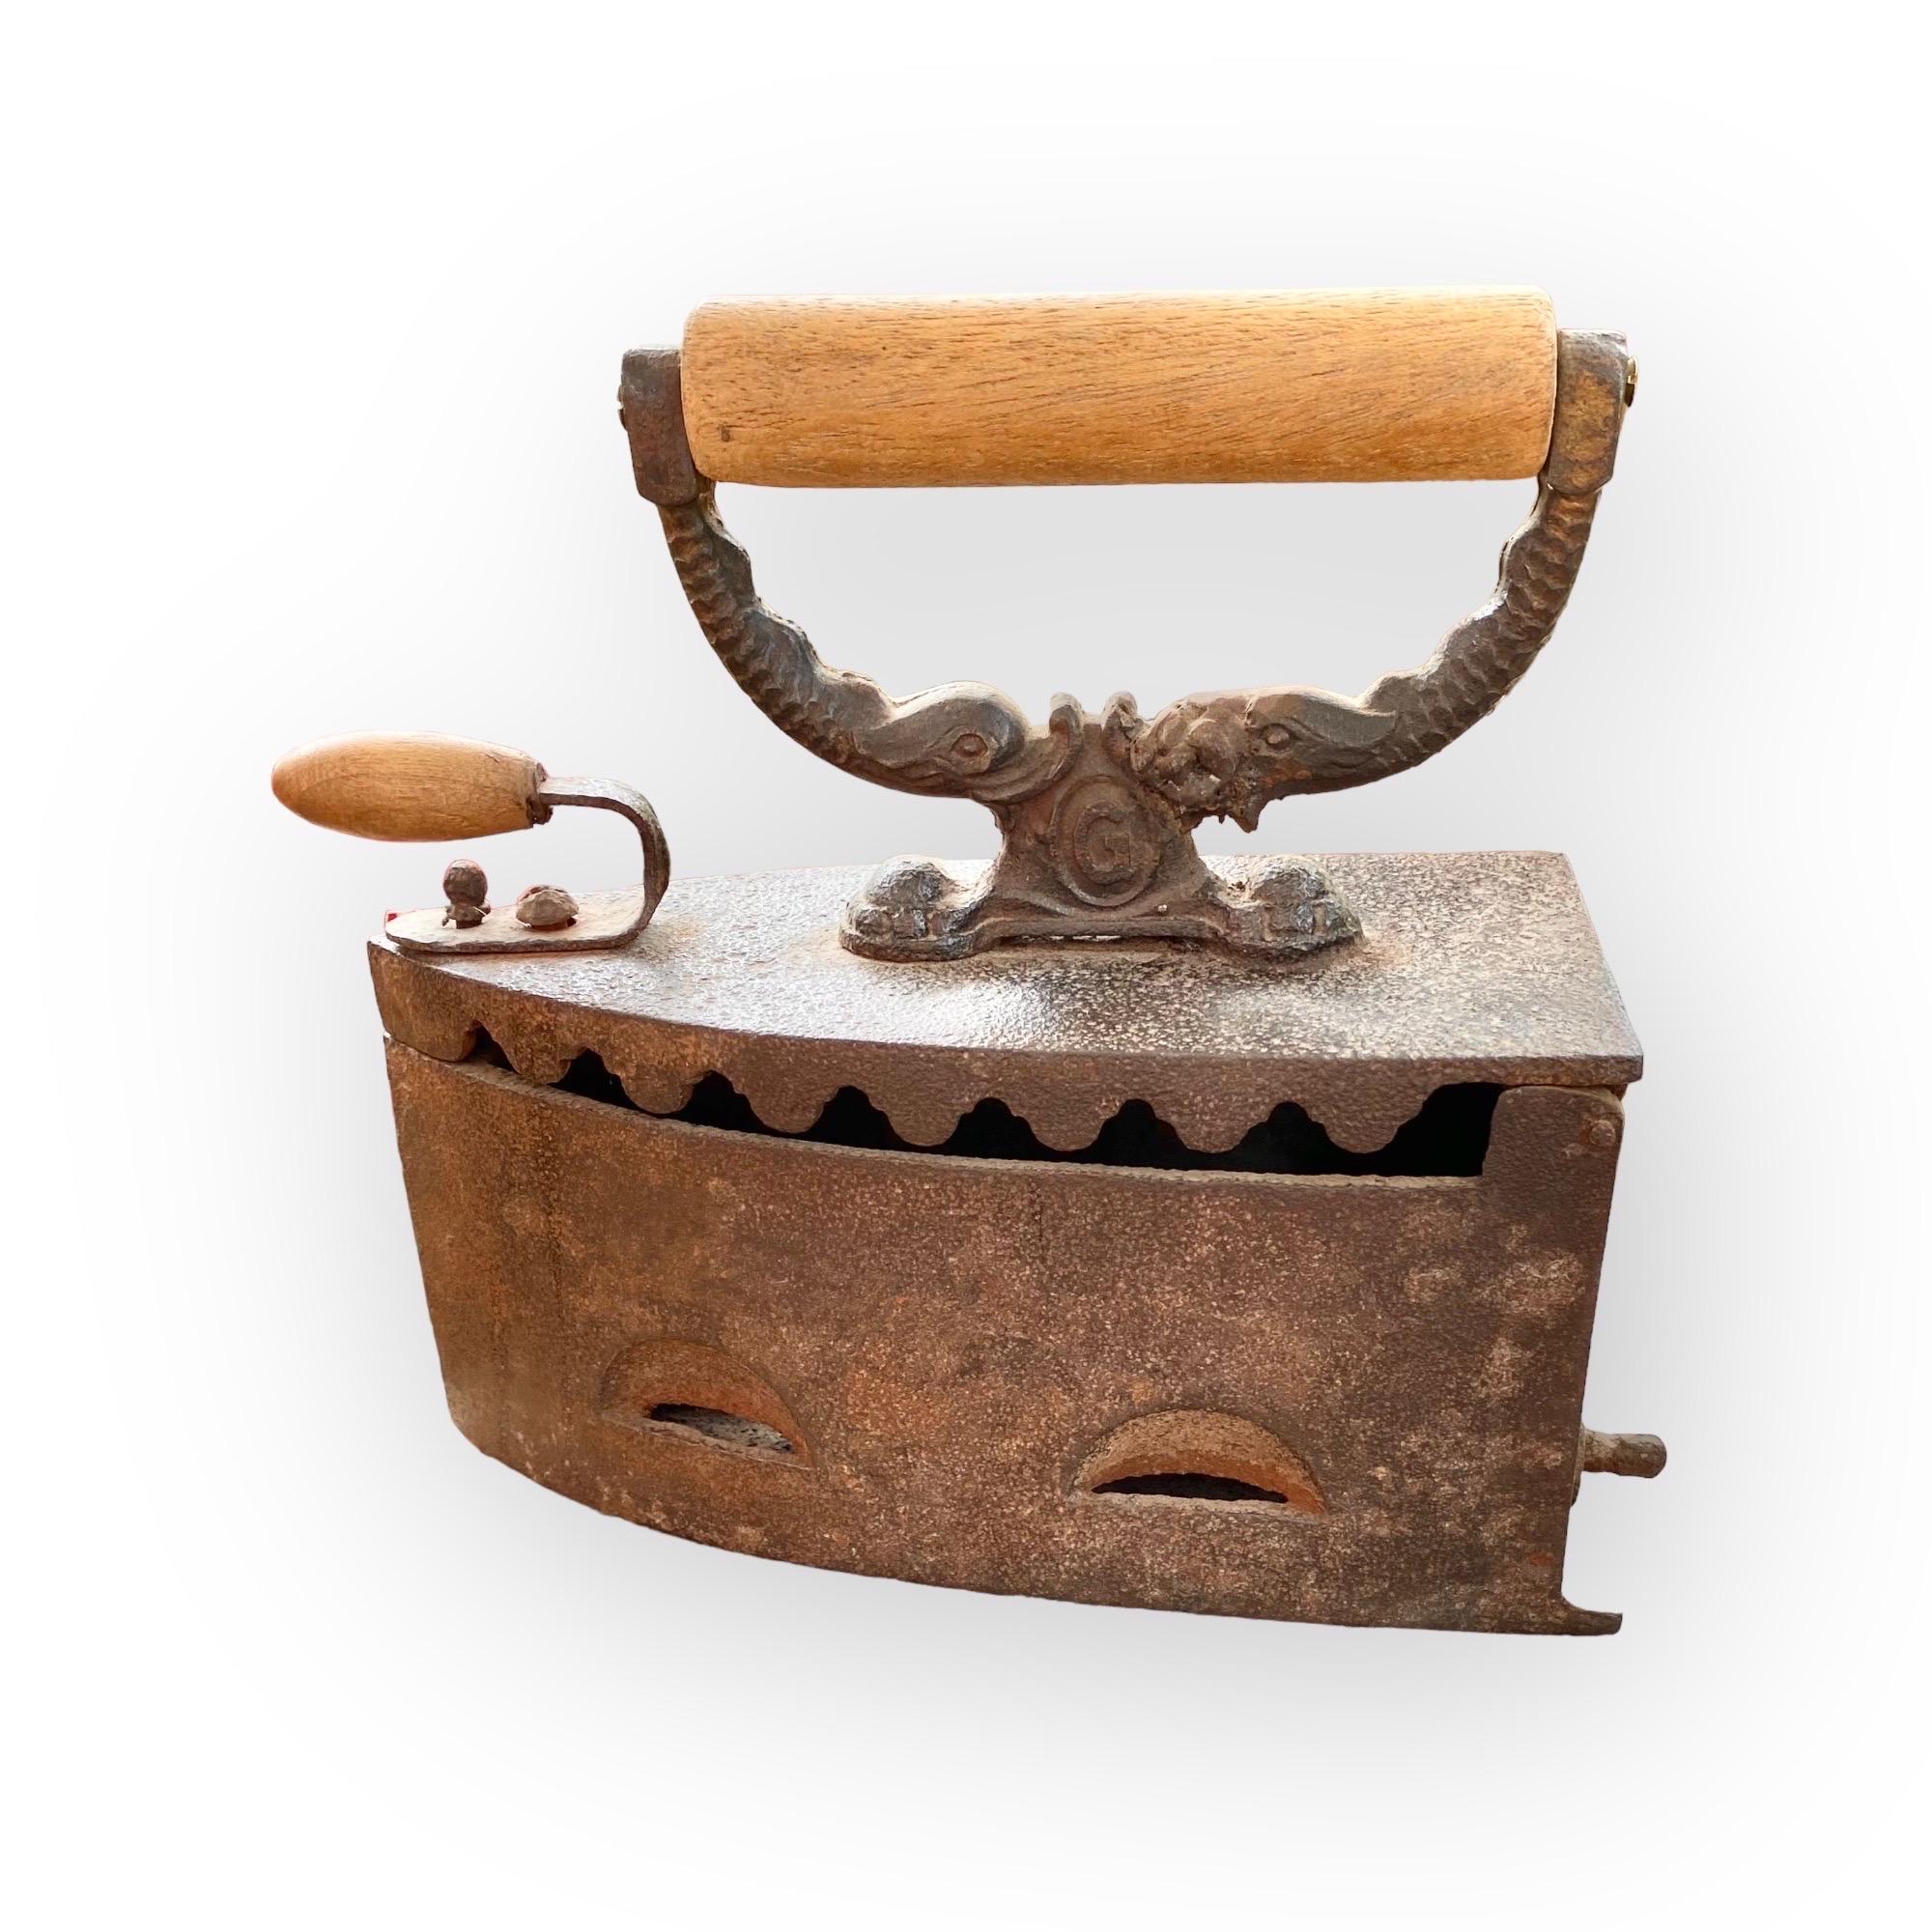 A charming antique 19th century French iron and wood coal iron with an unusual dolphin decorated iron and wood handle from the provinces of France. 